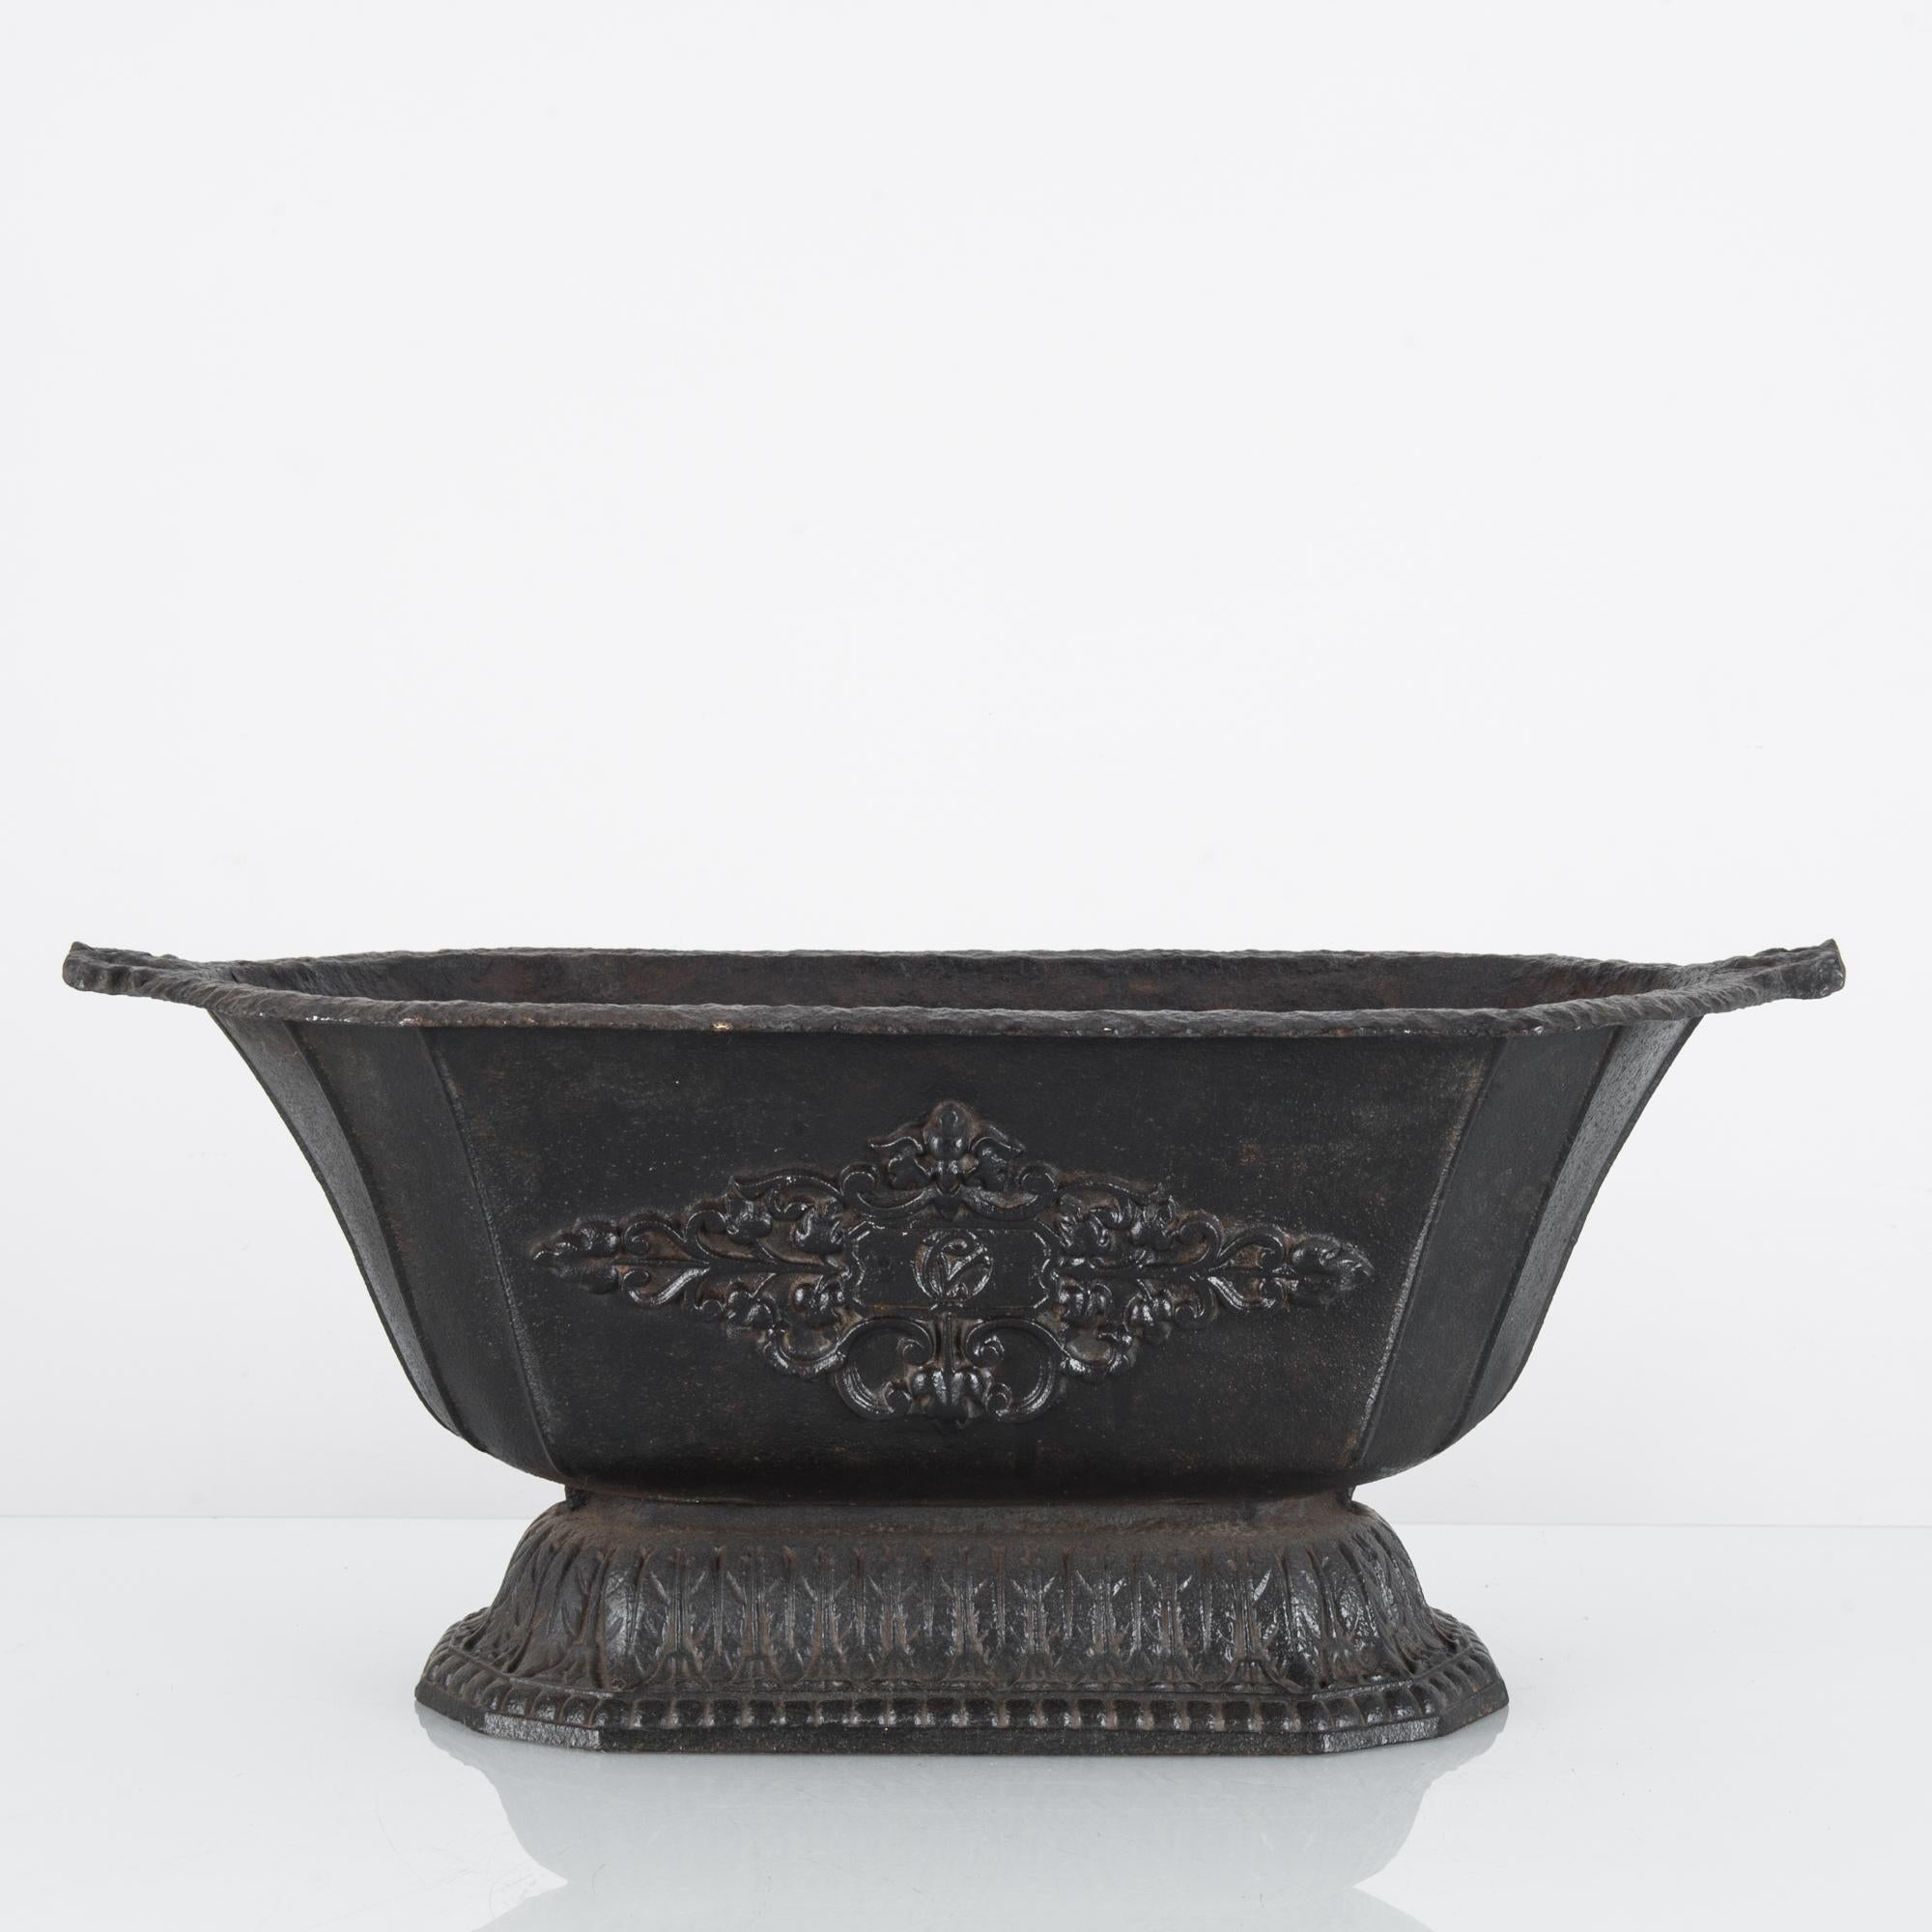 An antique cast iron planter from Belgium, circa 1881. A hearty planter in a classic, practical design ready for interior or exterior use. Marked on the side by a floral crest in relief hovering in stasis above etchings around the lower rim,